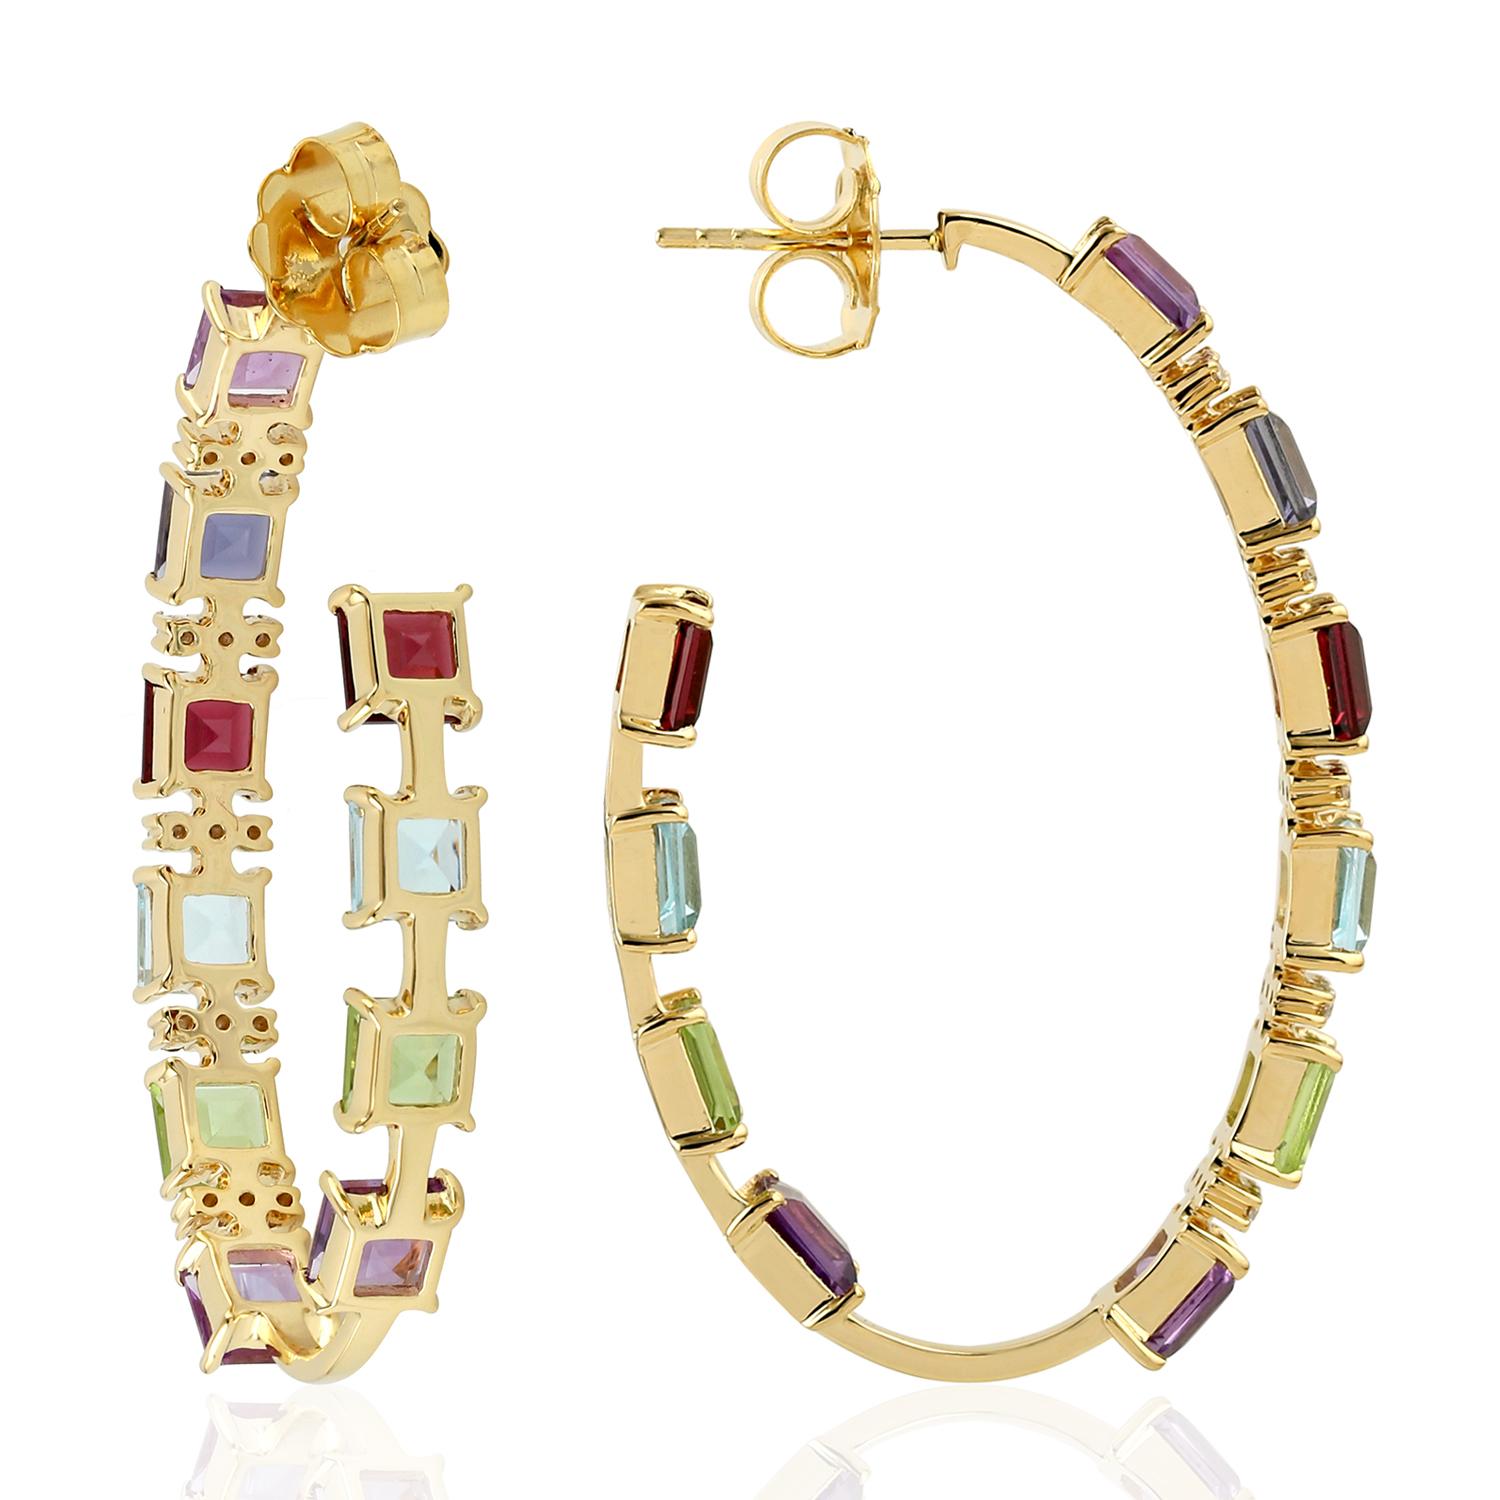 Handcrafted from 18-karat gold, these beautiful inside out hoop earrings are studded with multi gemstone and .41 carats of sparkling diamonds.

FOLLOW  MEGHNA JEWELS storefront to view the latest collection & exclusive pieces.  Meghna Jewels is